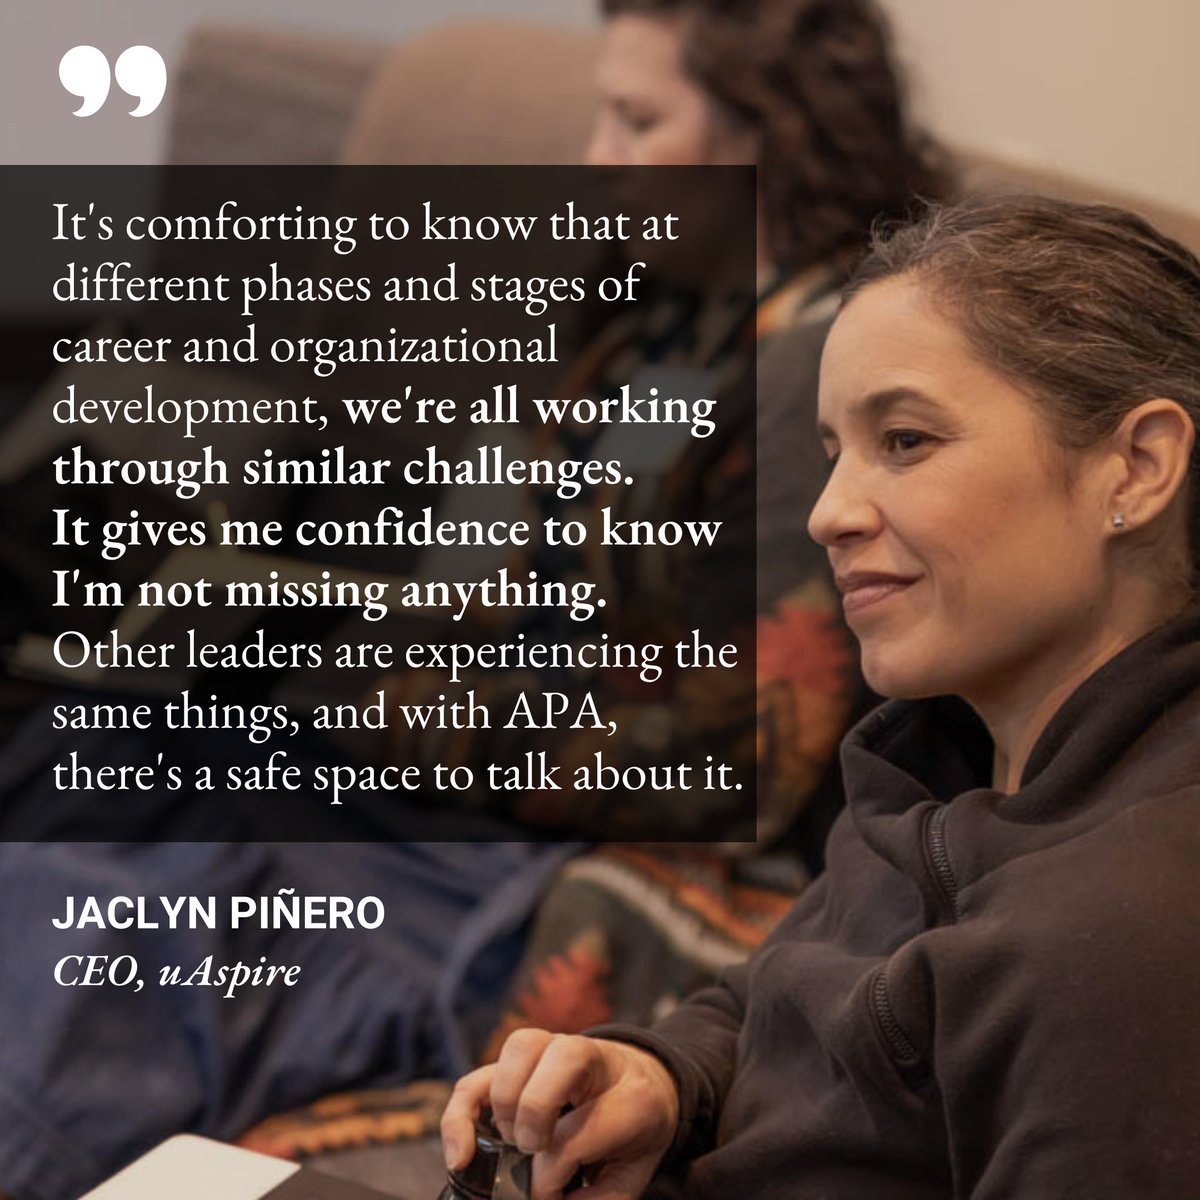 “It's comforting to know that at different phases and stages of career and organizational development, we're all working through similar challenges. Other leaders are experiencing the same things, and with APA, there's a safe space to talk about it.” - Jaclyn Piñero, @uAspireCEO